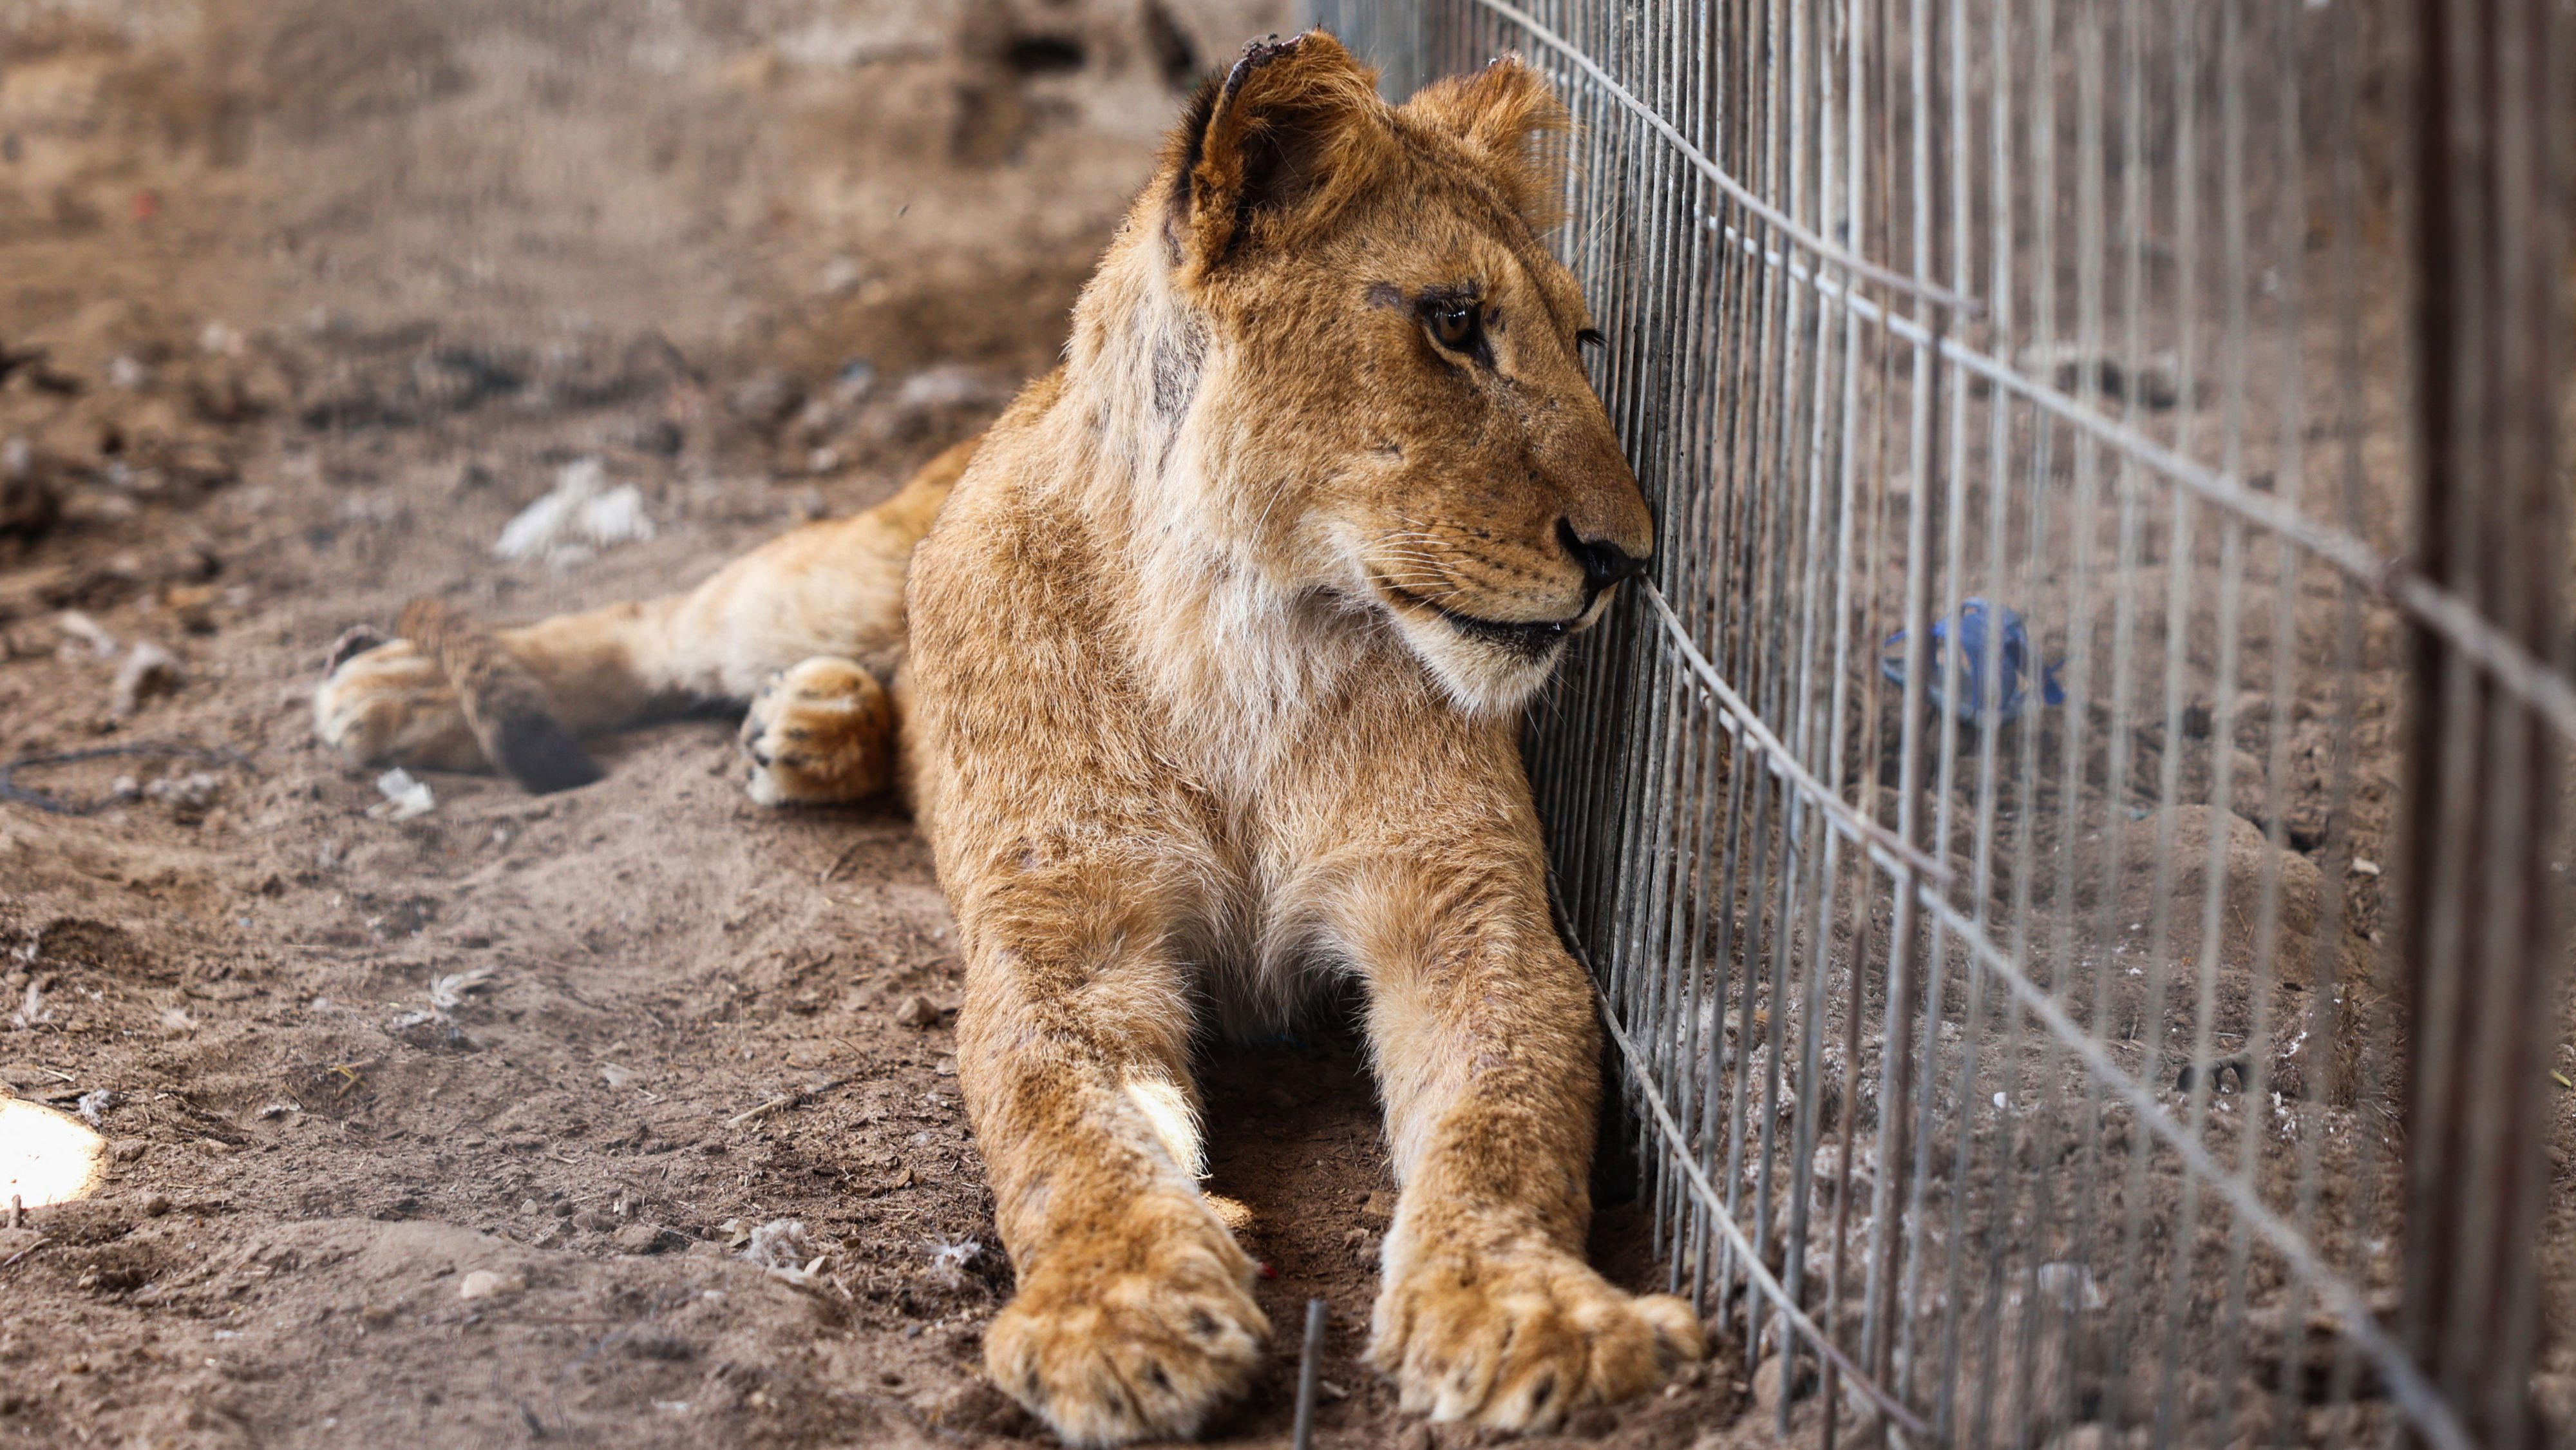 One of the lions under threat at Gaza zoo. /Eyad Baba/AFP